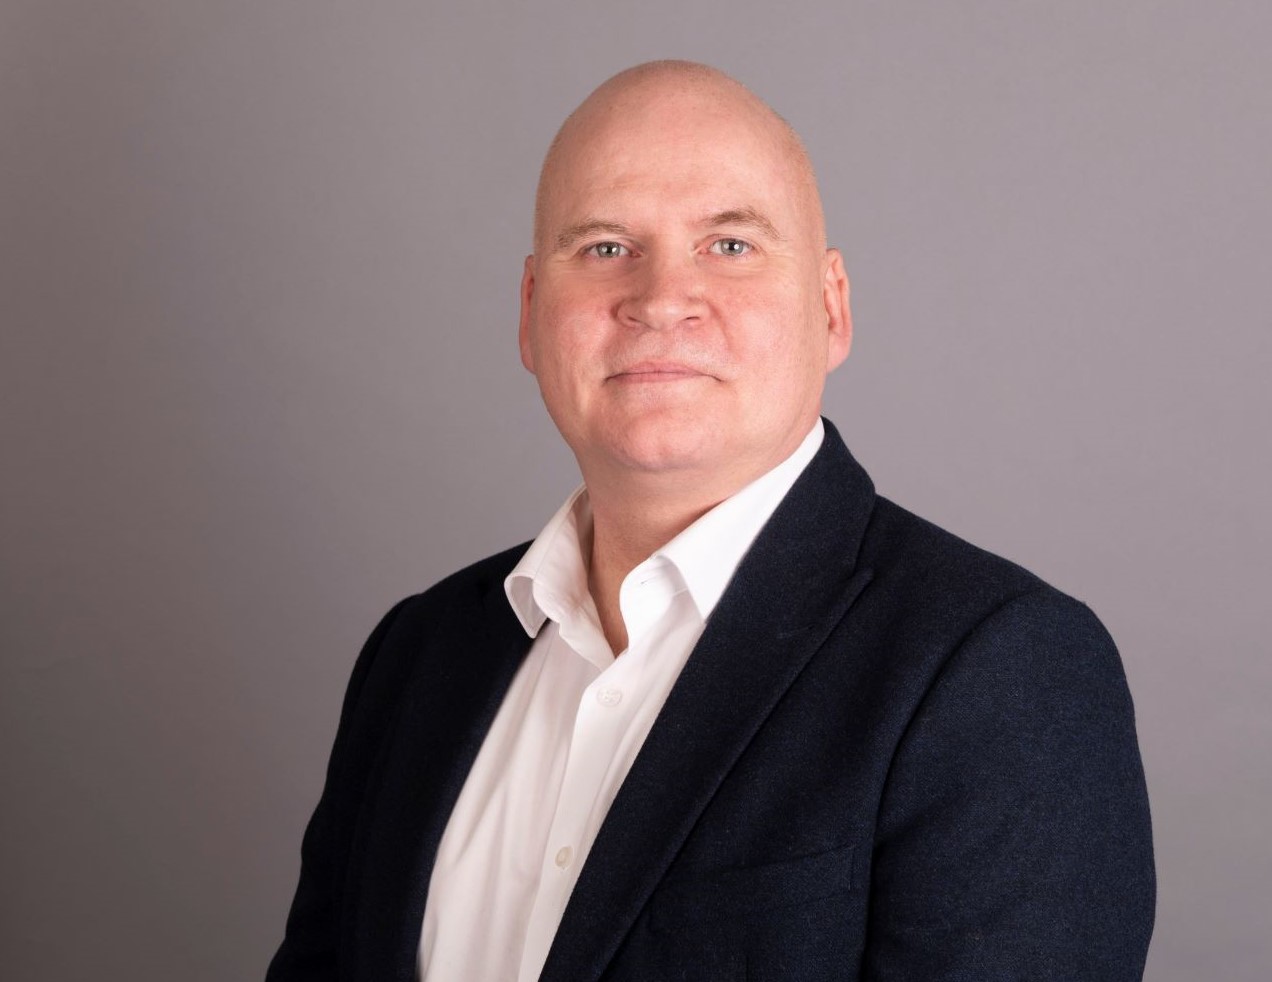 Gilson Gray appoints Martin Cryans as business development director